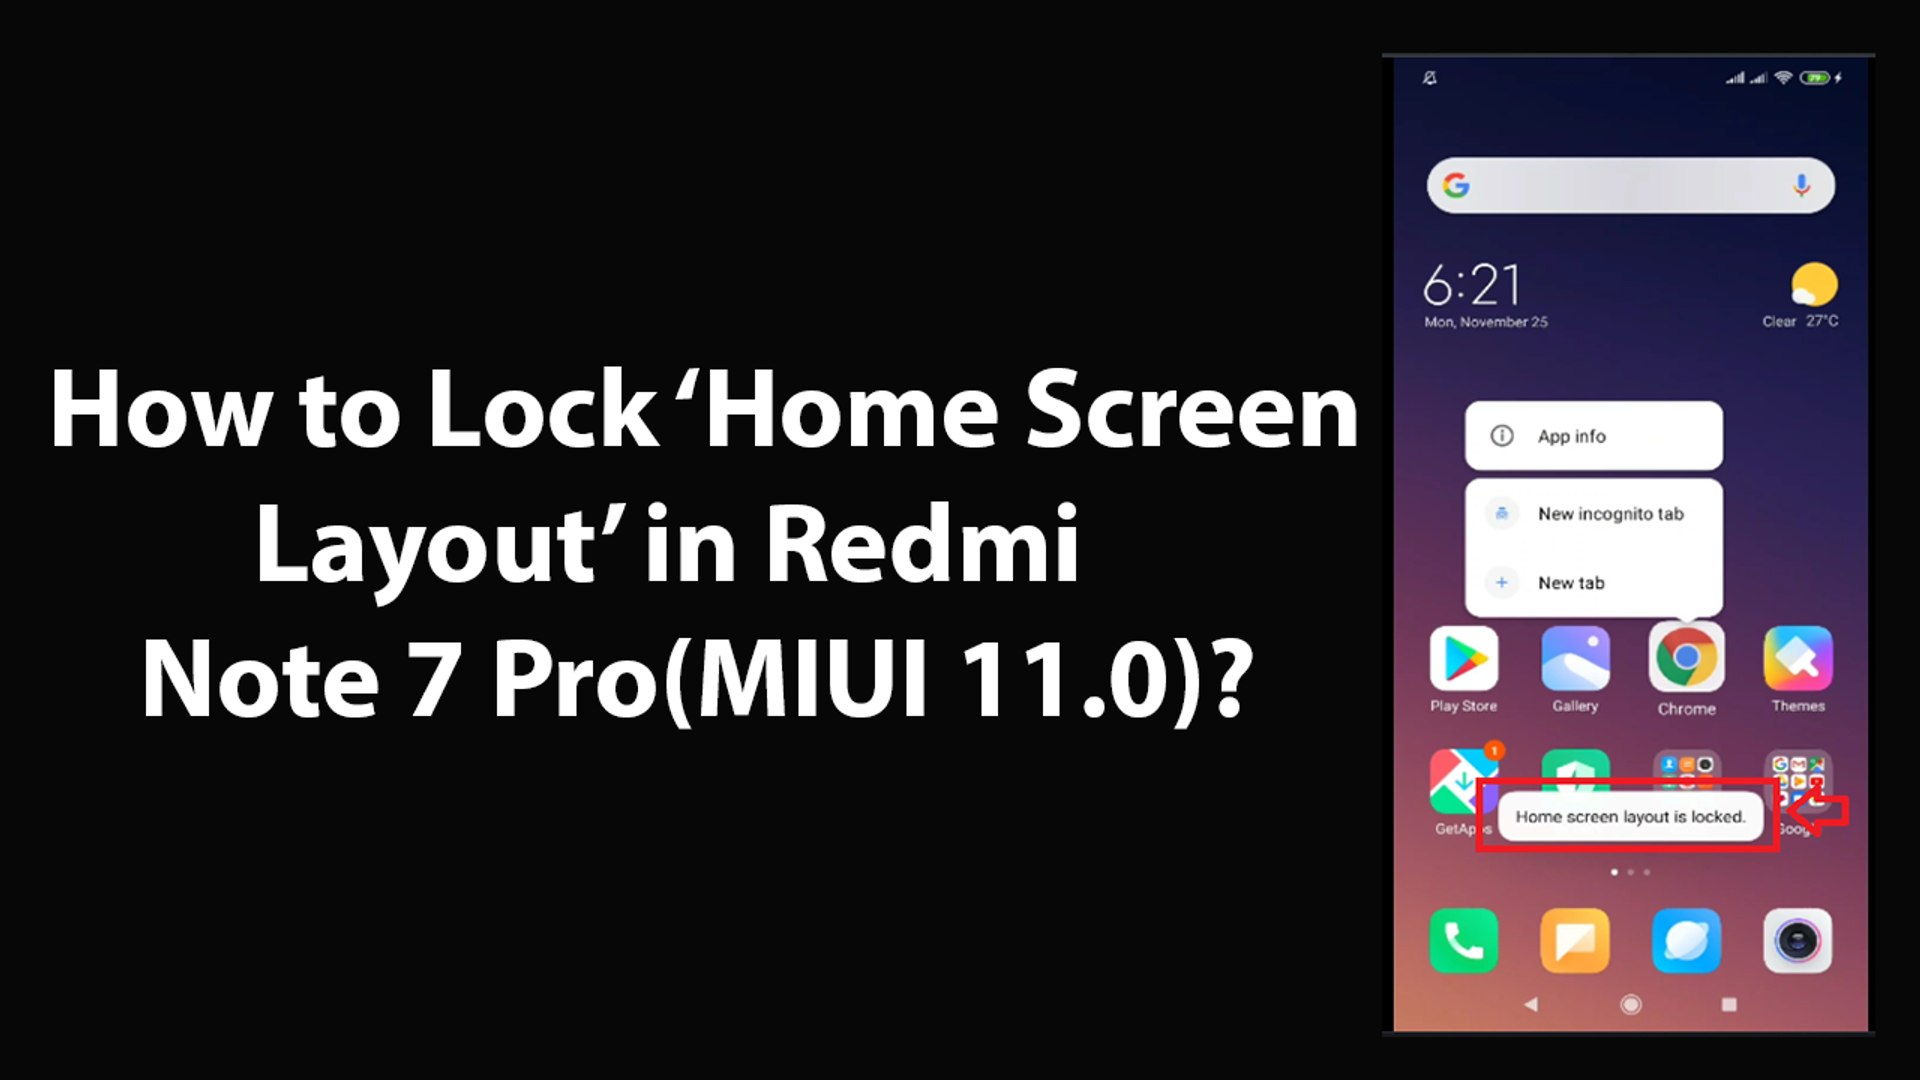 How to Lock Home Screen Layout in Redmi Note 7 Pro(MIUI )? - video  Dailymotion